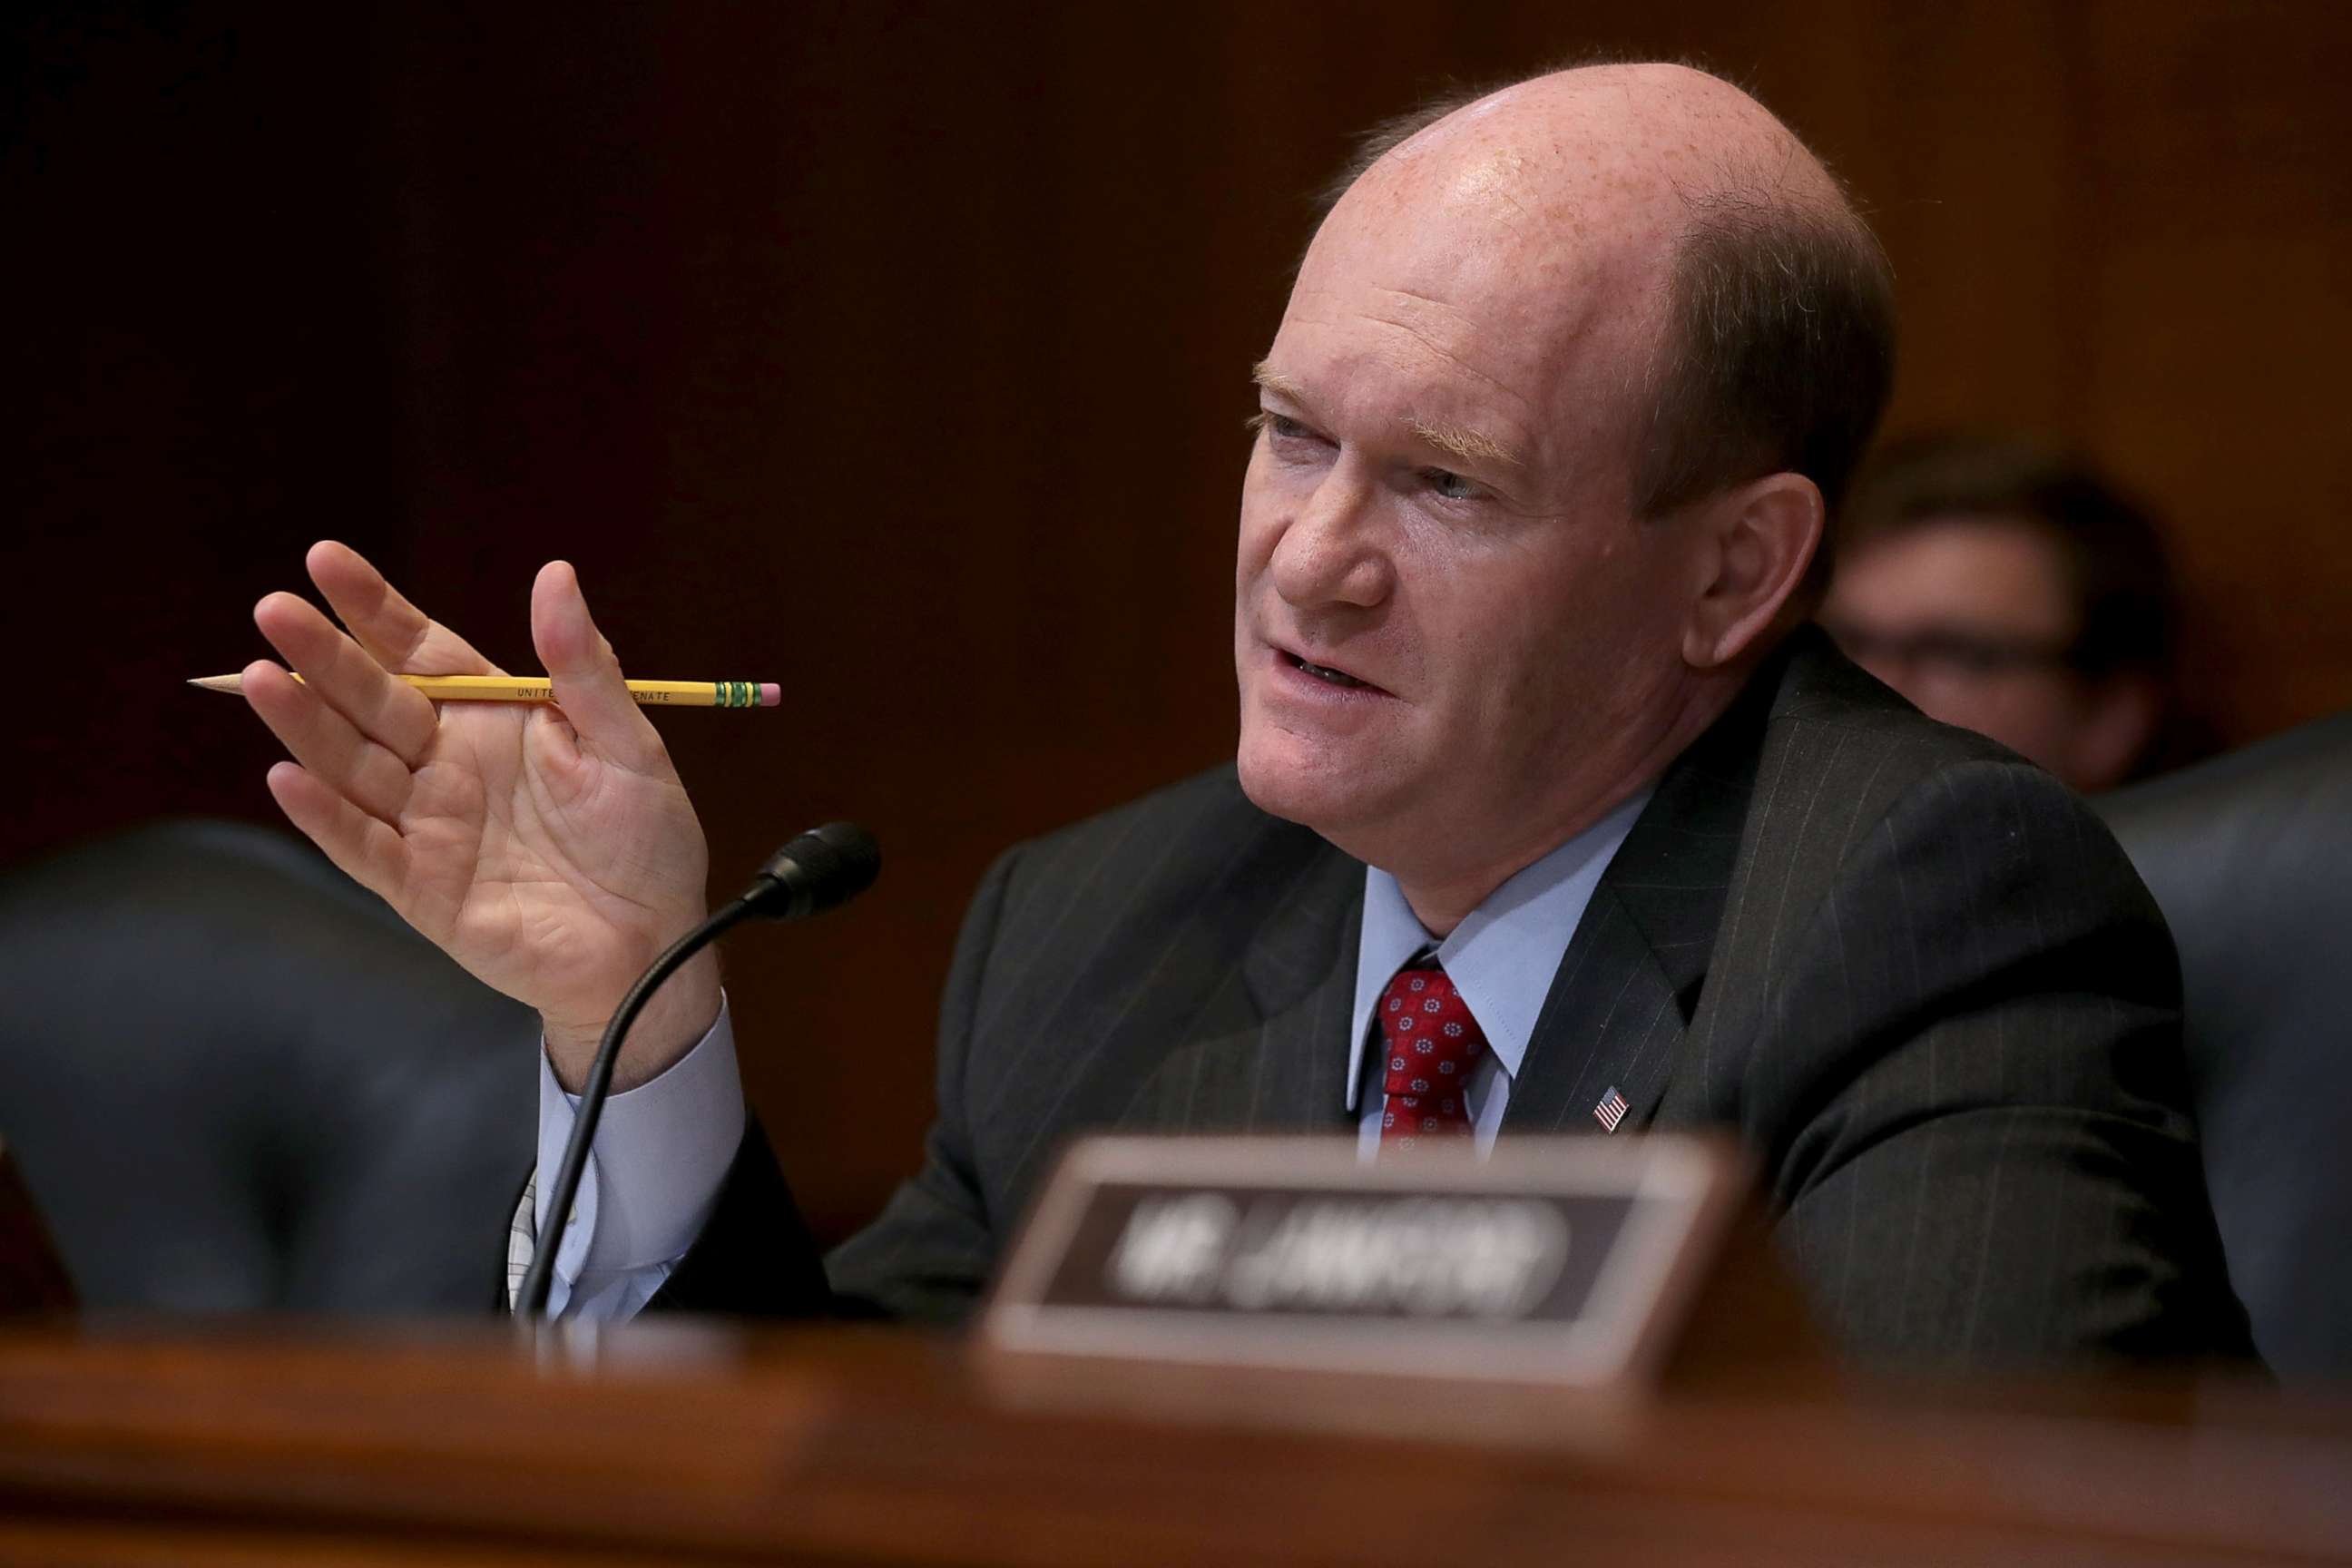 PHOTO: Senator Chris Coons, ranking member of the Senate Appropriations Committee's Financial Services and General Government Subcommittee during a hearing, May 22, 2018 in Washington, DC.